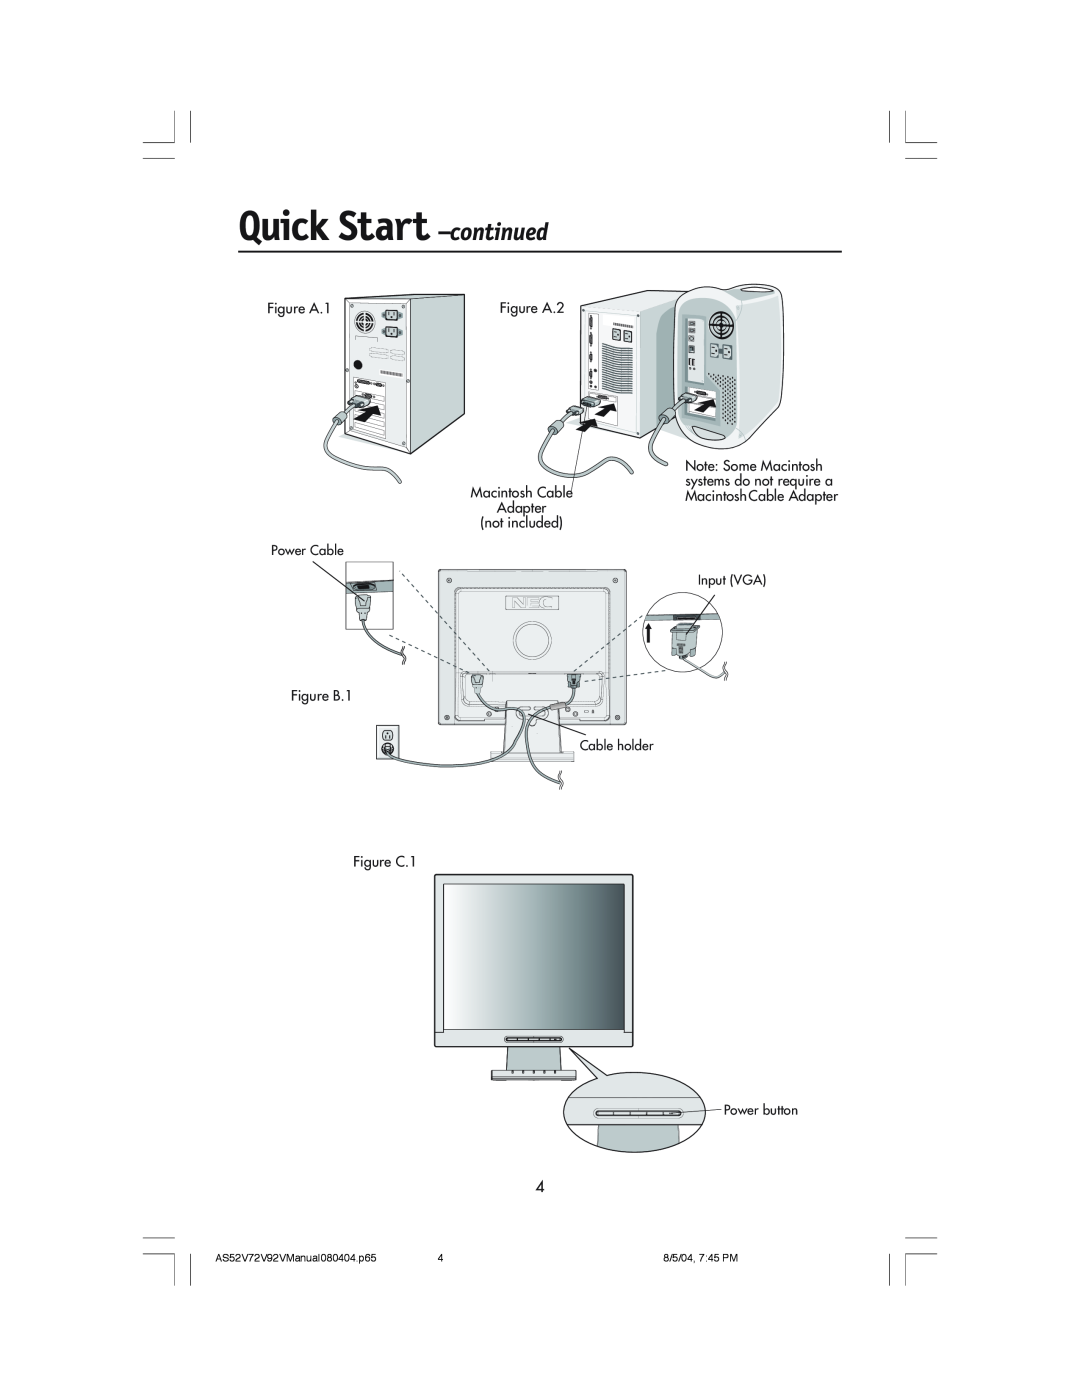 NEC LCD72V, LCD52V manual Quick Start -continued, Figure A.1, Macintosh Cable Adapter not included, Figure B.1, Figure C.1 